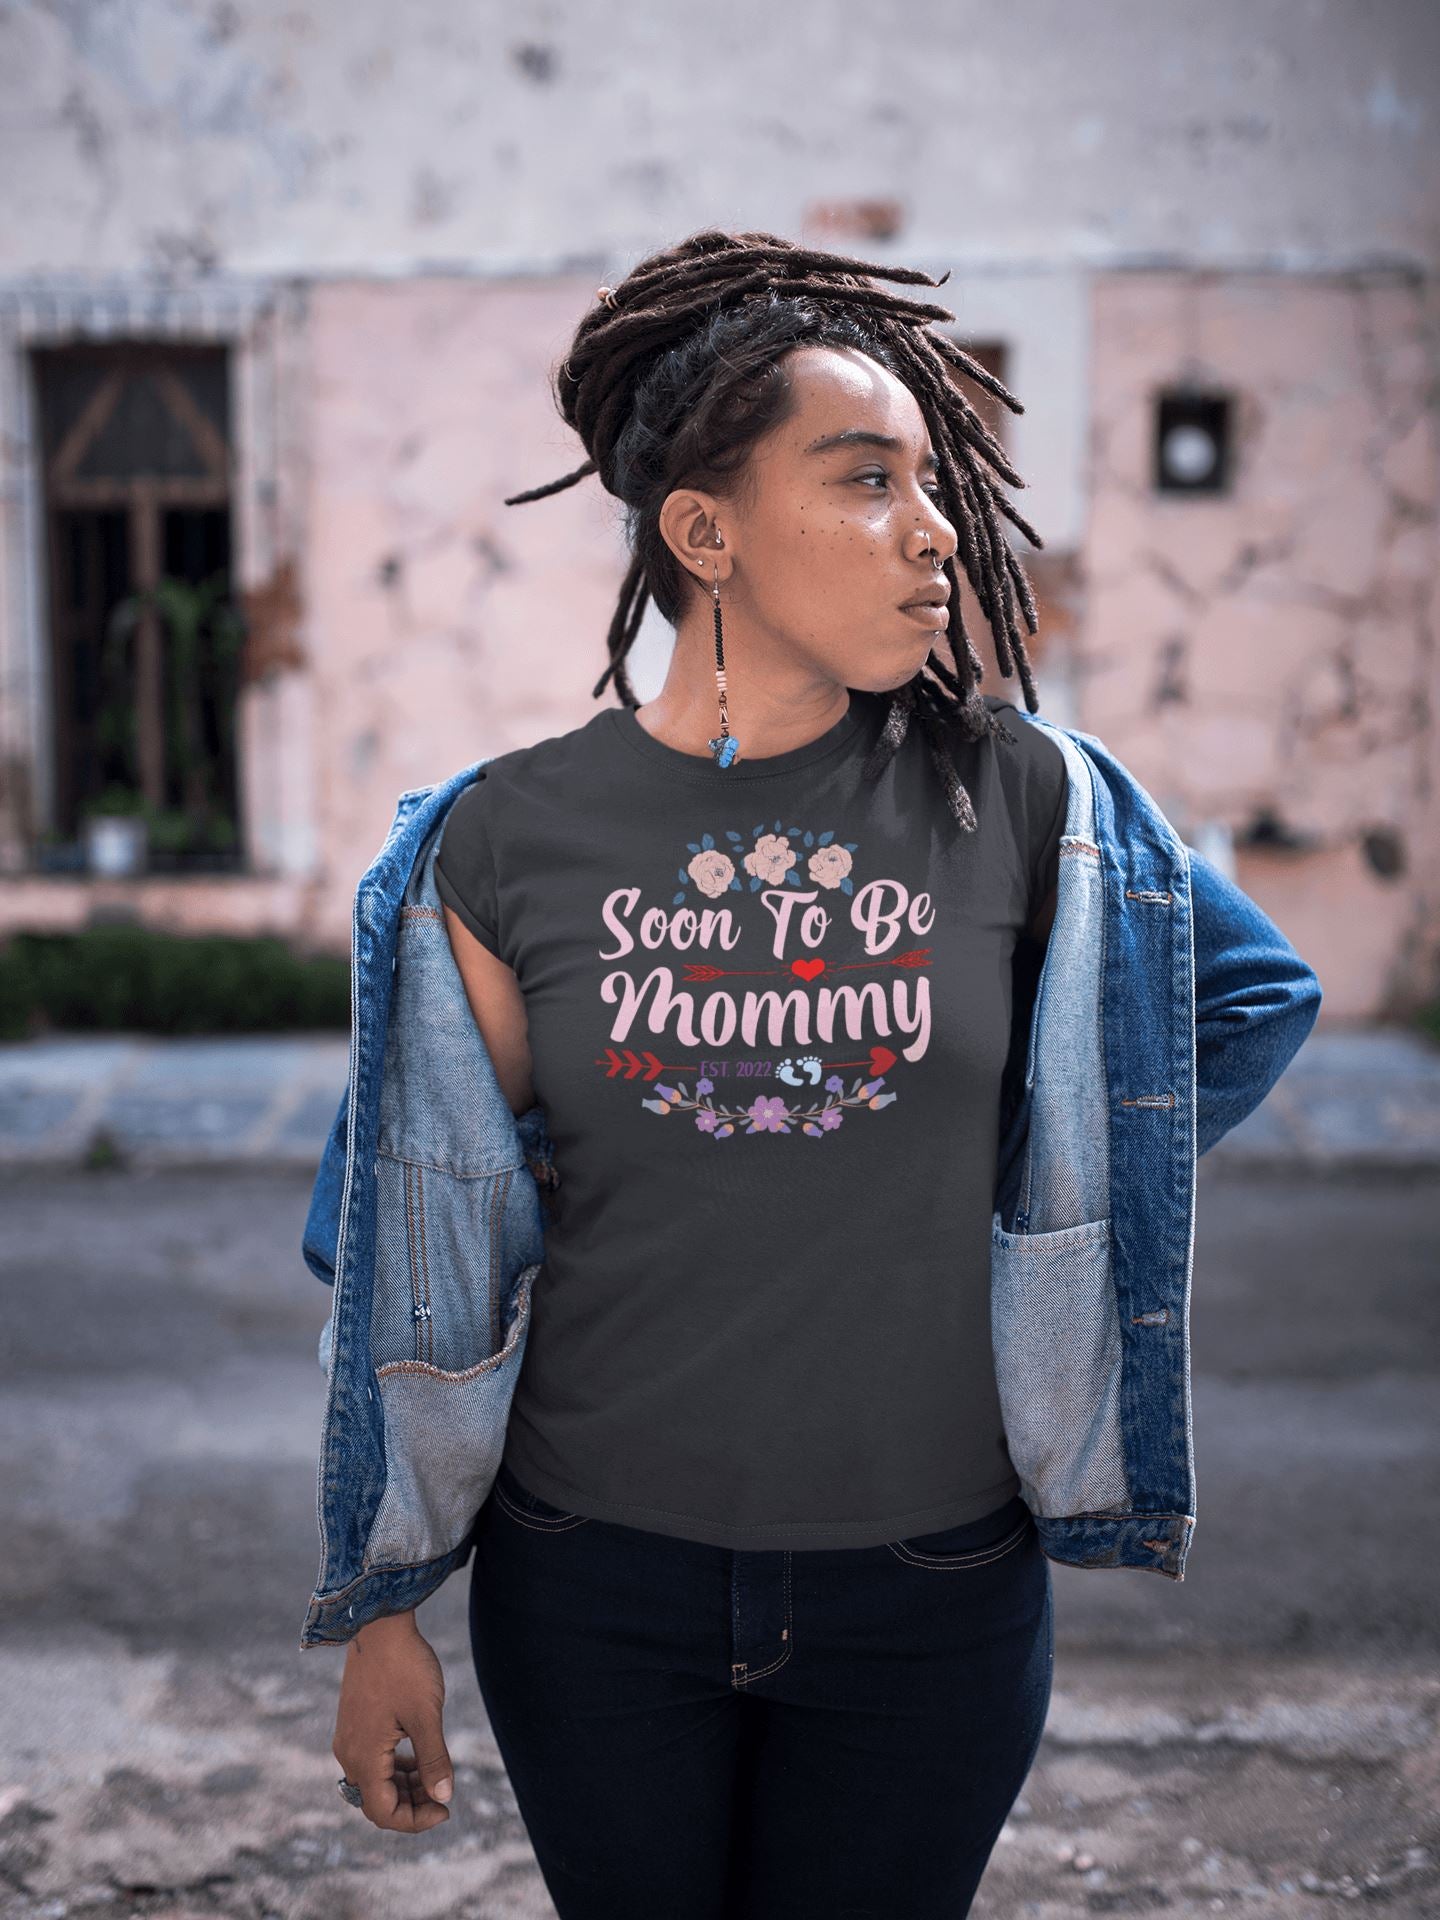 Soon To Be Mommy Est. 2022 Special Black T Shirt for Women - Catch My Drift India  black, clothing, expecting mom, made in india, mom, mother, parents, pregnant, shirt, t shirt, tshirt